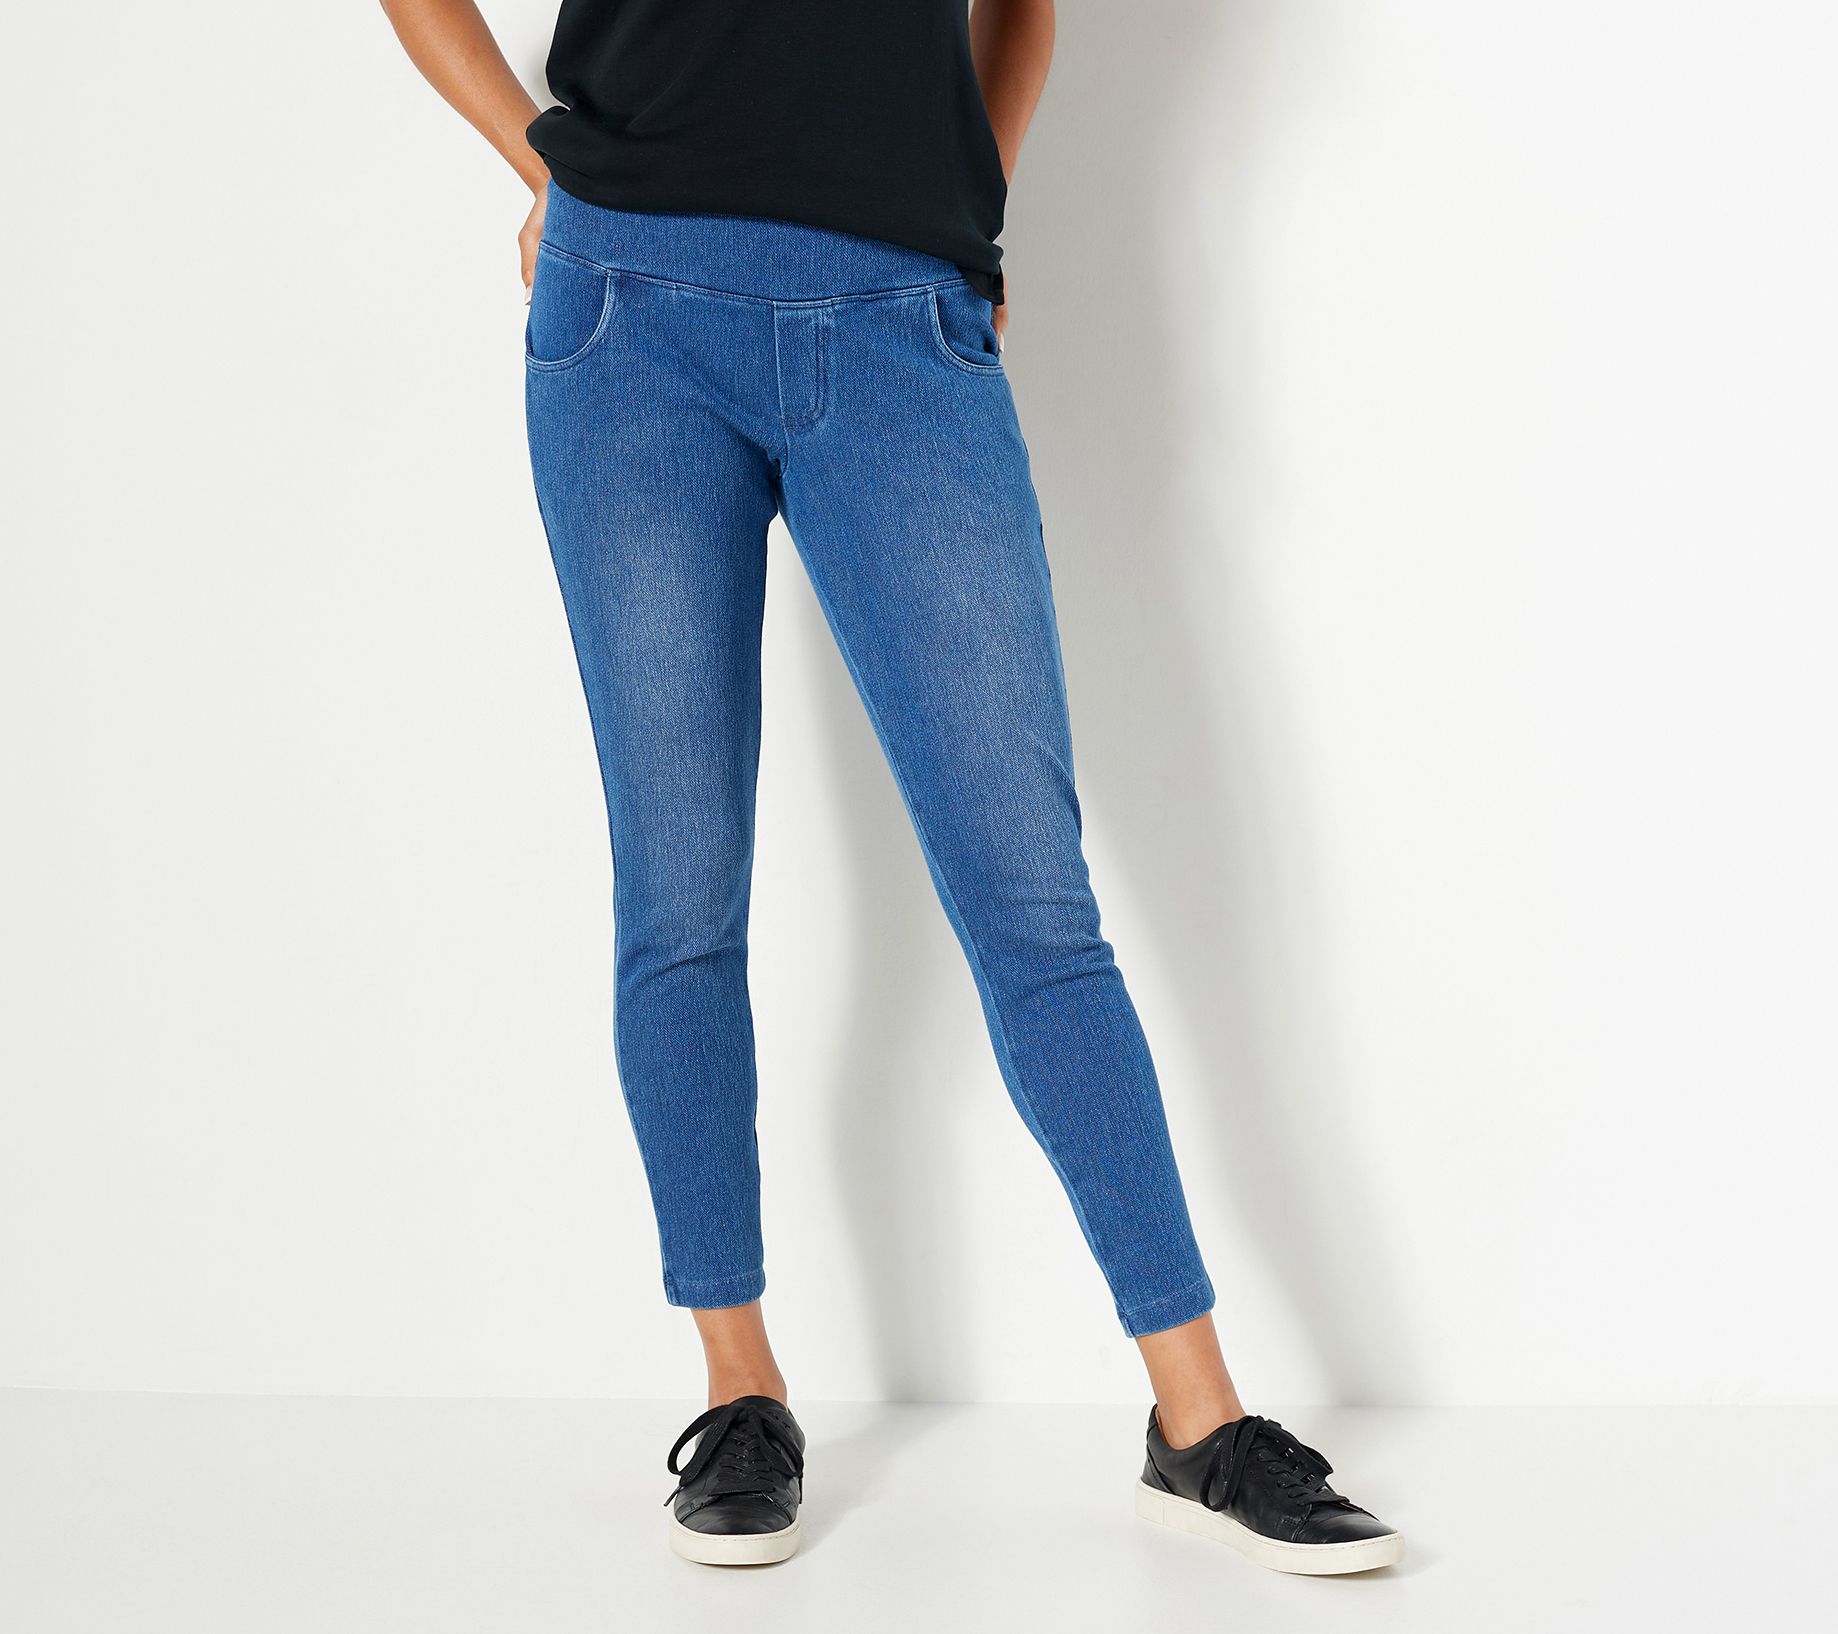 Women with Control Petite Prime Stretch Denim Leggings with